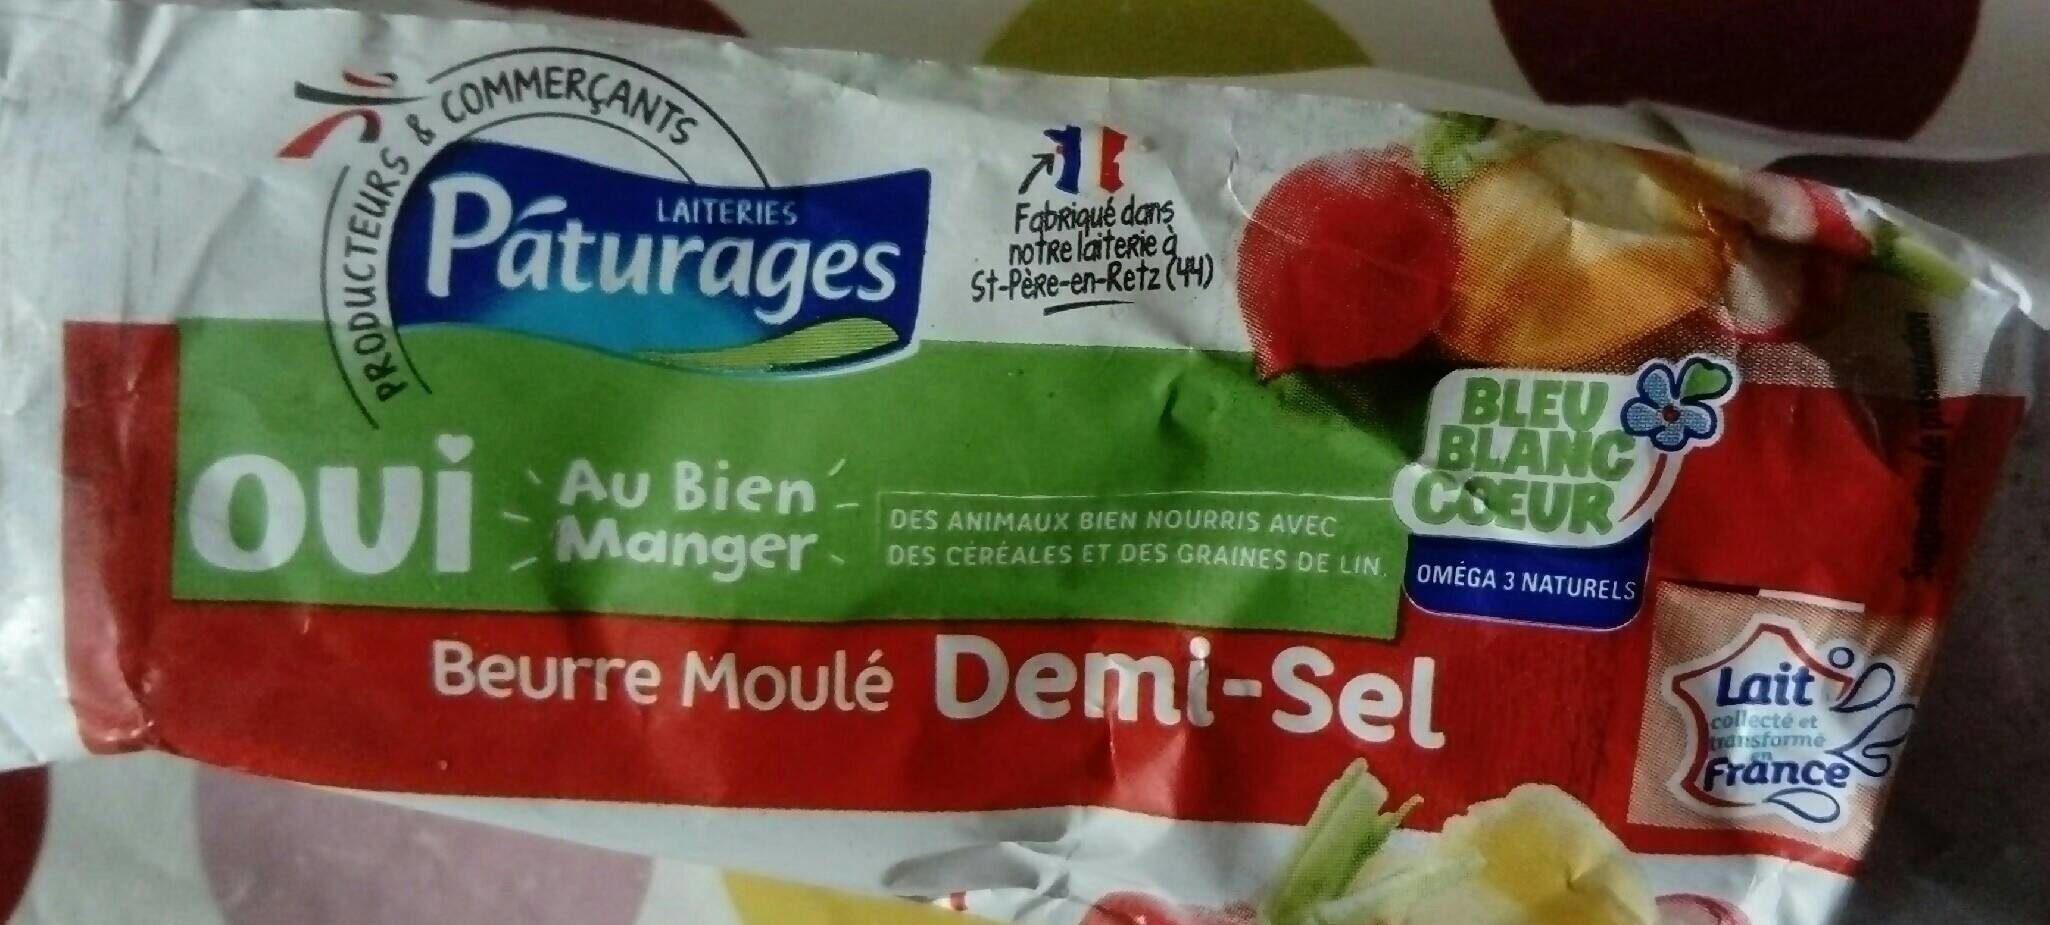 Beurre demi-sel - Product - fr